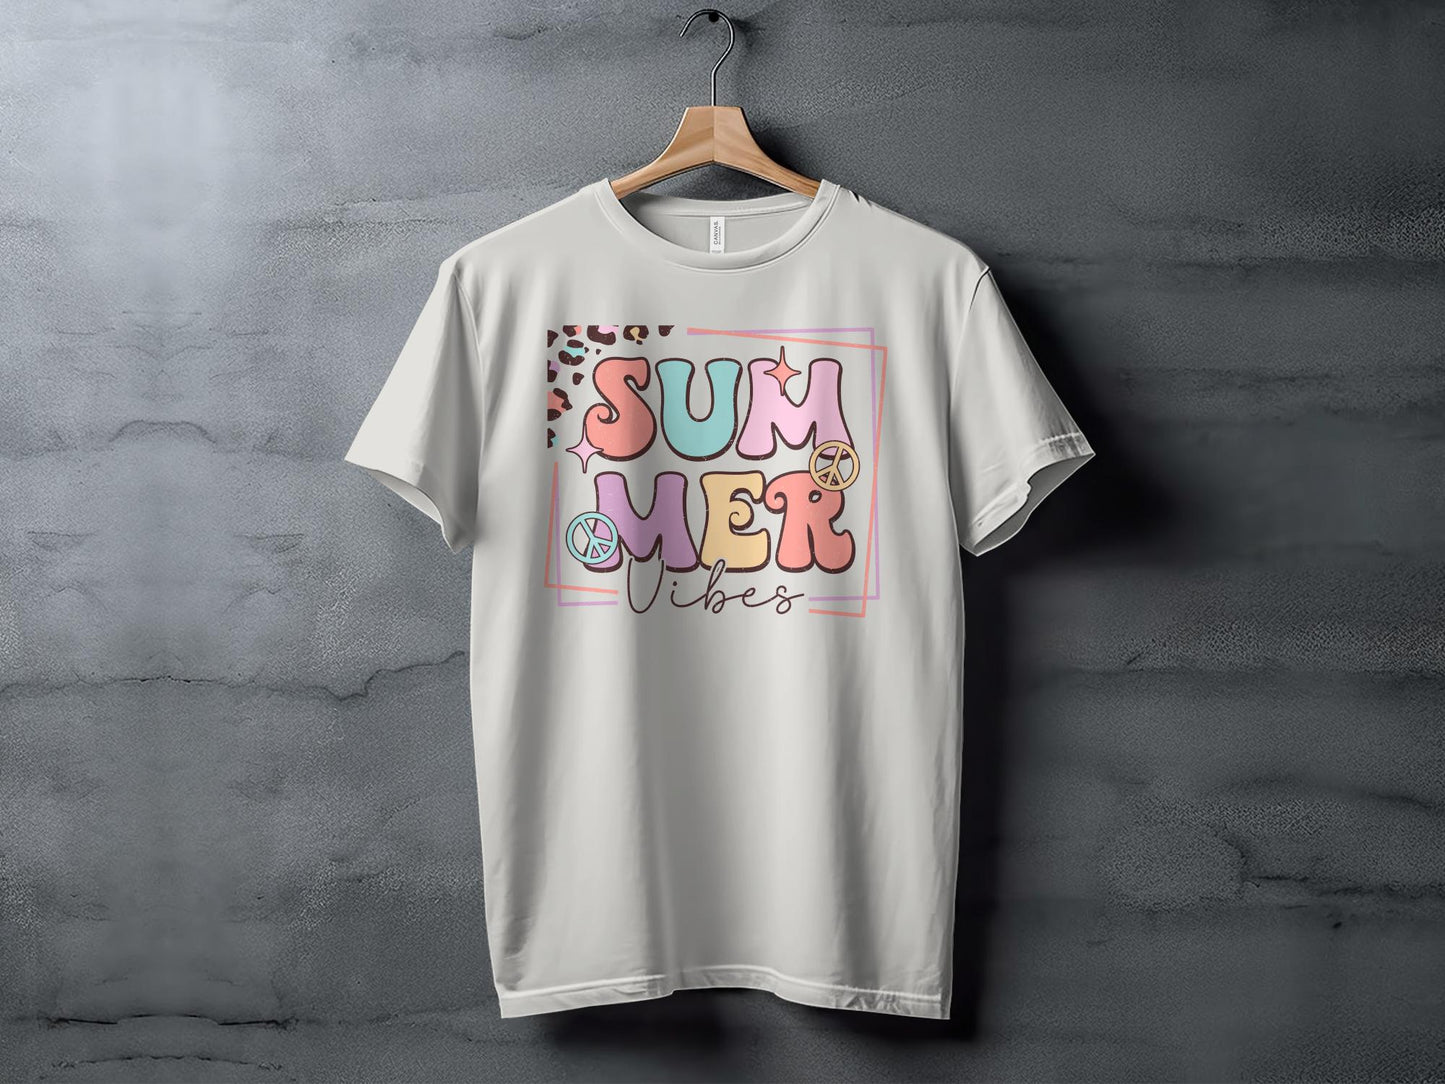 Colorful Summer Vibes T-Shirt, Trendy Beach Style Top, Casual Vacation Tee, Graphic Tee for Women and Men